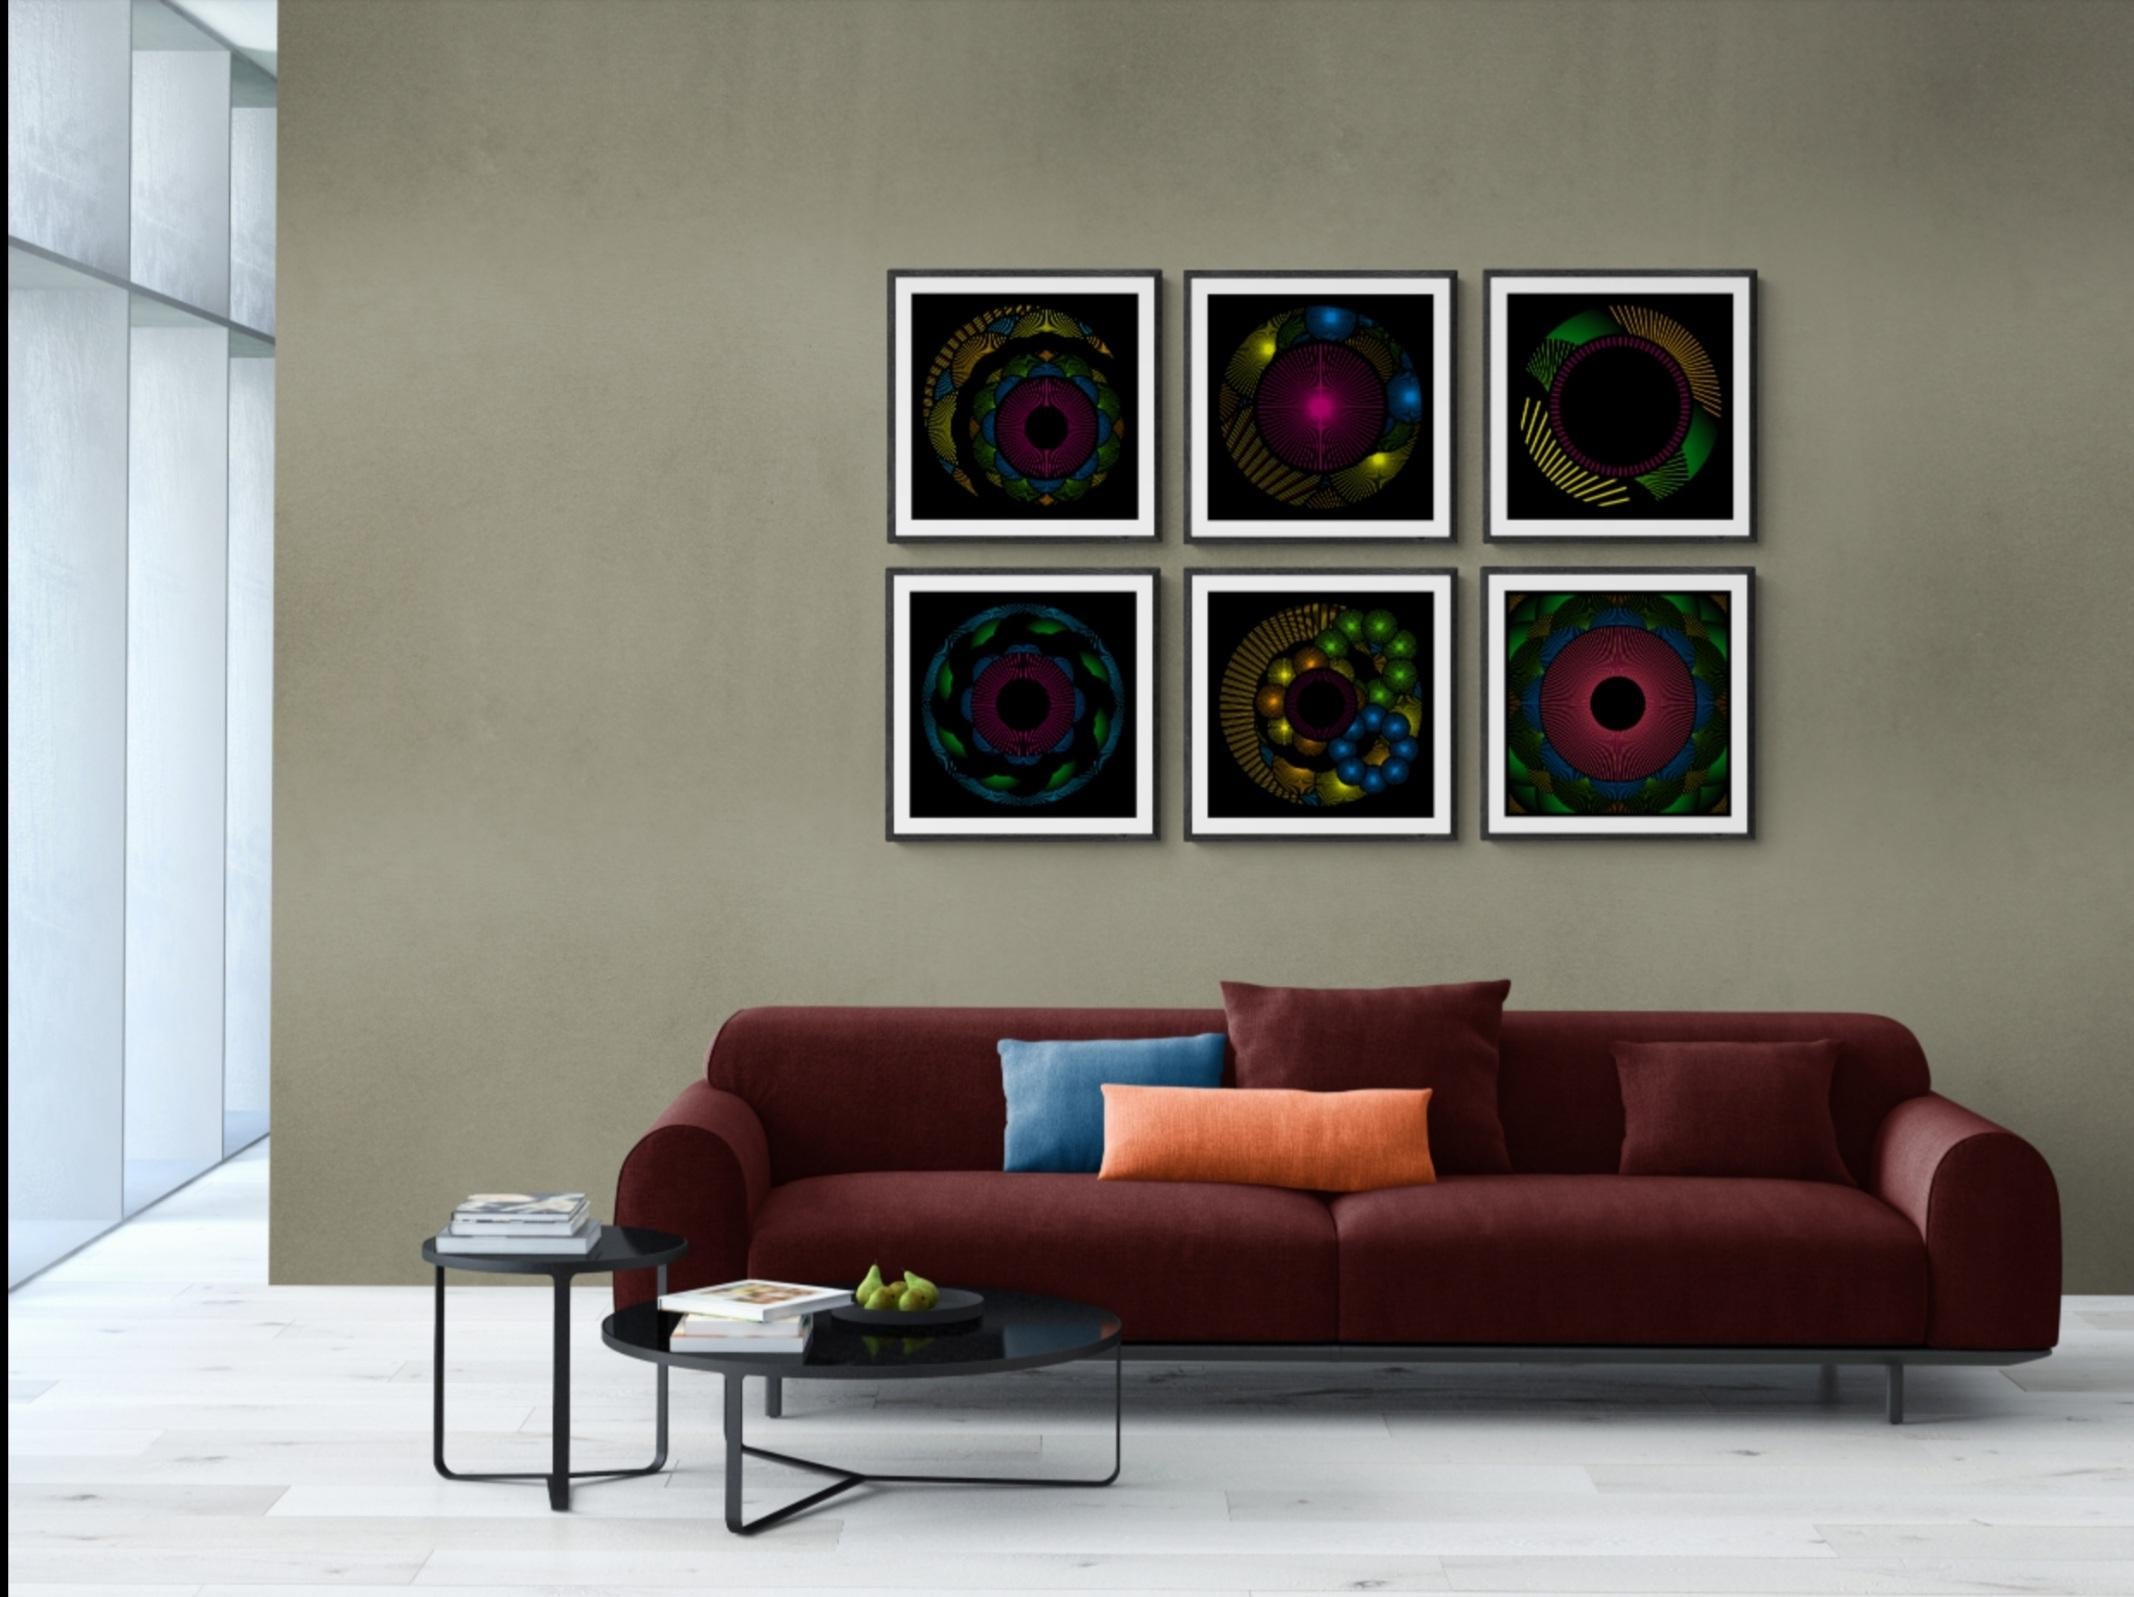 Nebulosa 17 - Abstract Geometric Print by Julio Campos